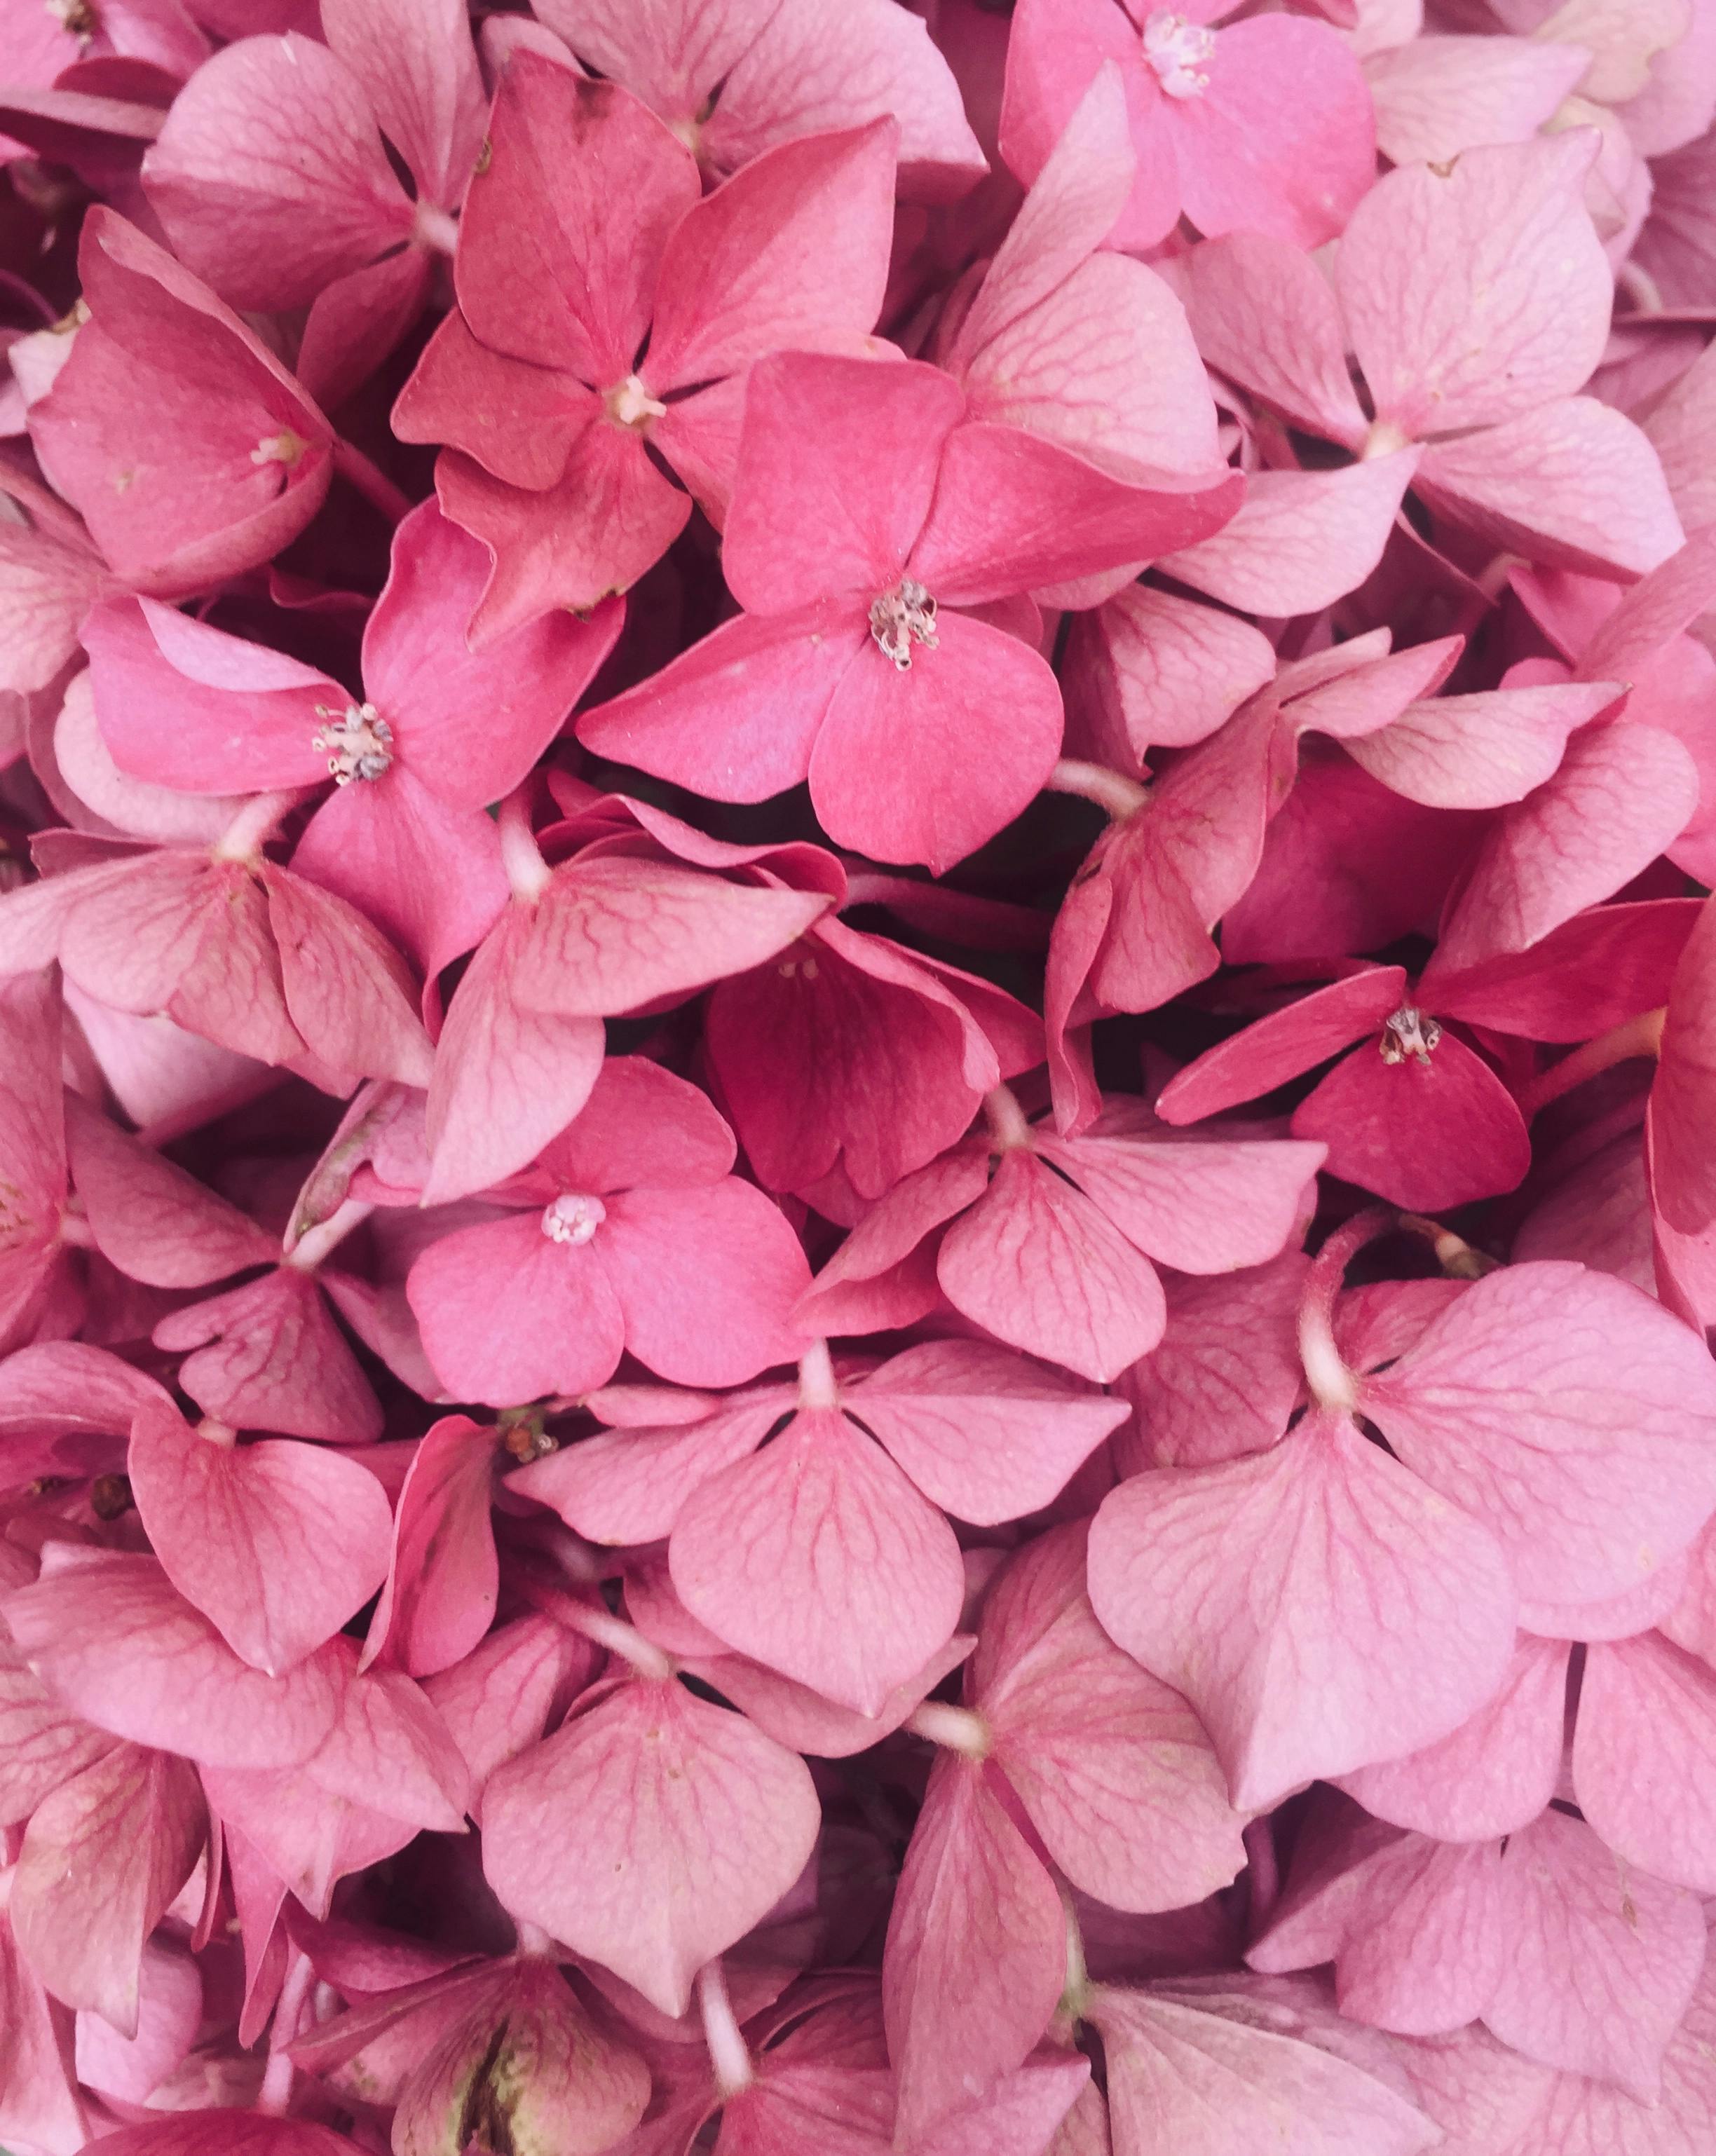 80000 Best Pink Flowers Images  100 Royalty Free Photo Downloads   Pexels  Free Stock Photos